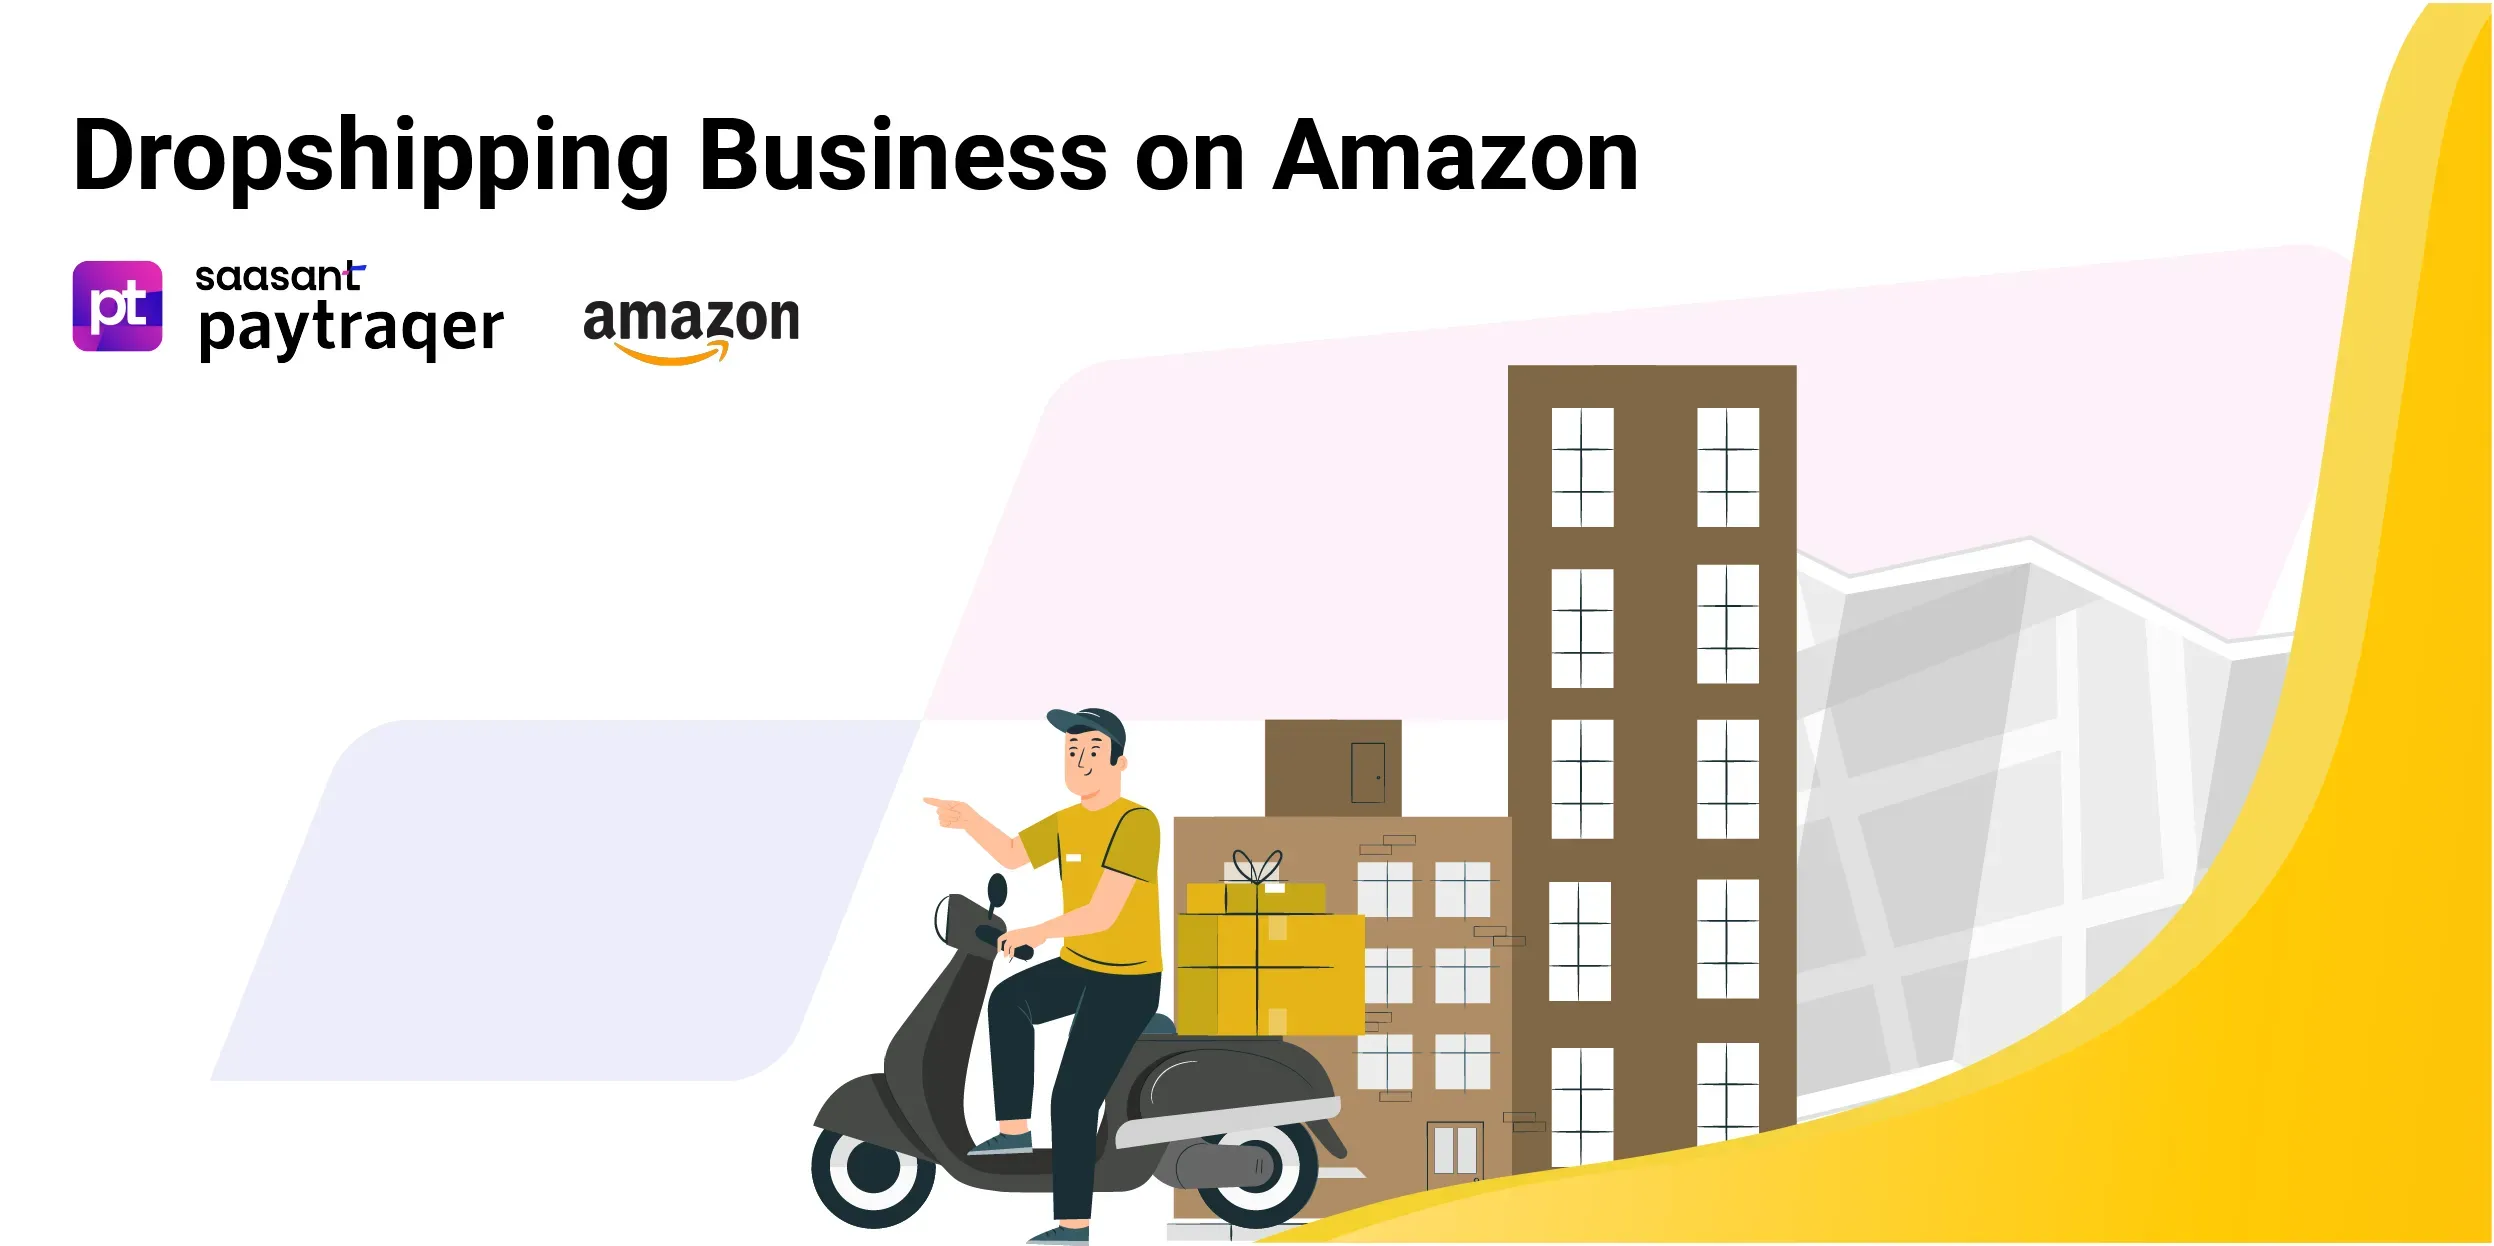 How Do You Start a Dropshipping Business on Amazon?